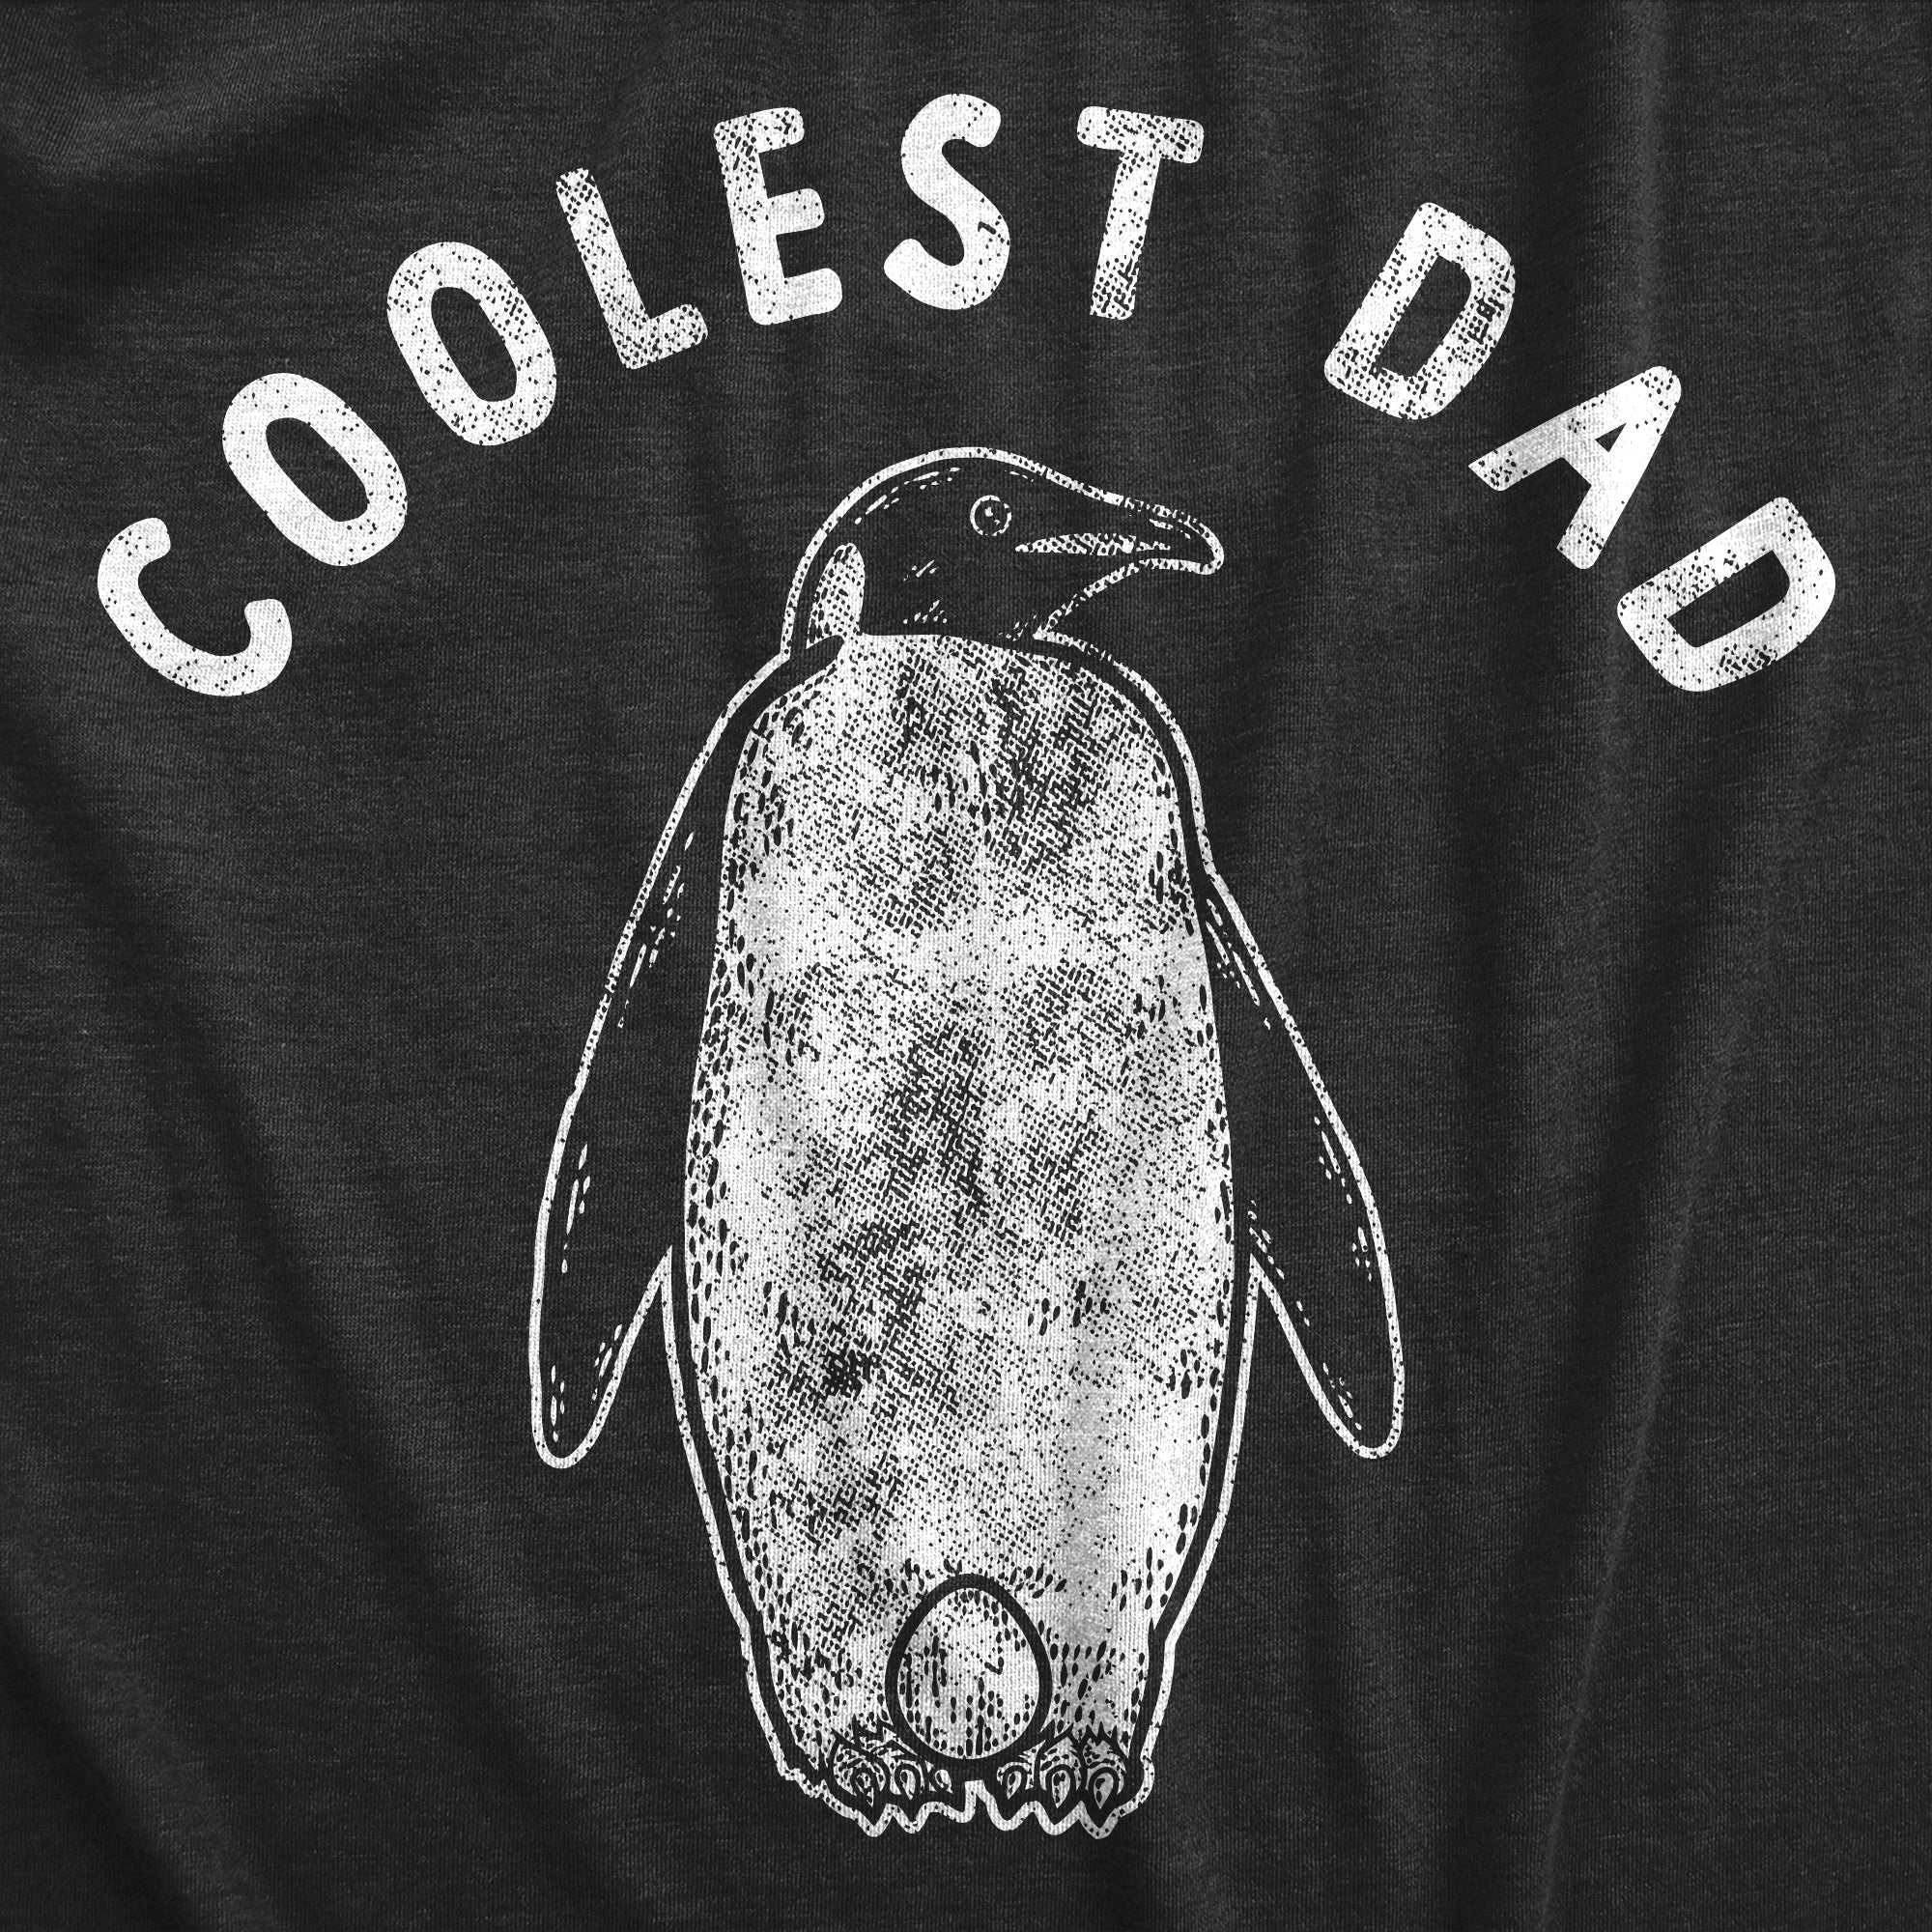 Funny Heather Black - Coolest Dad Coolest Dad Mens T Shirt Nerdy Father's Day Sarcastic Tee